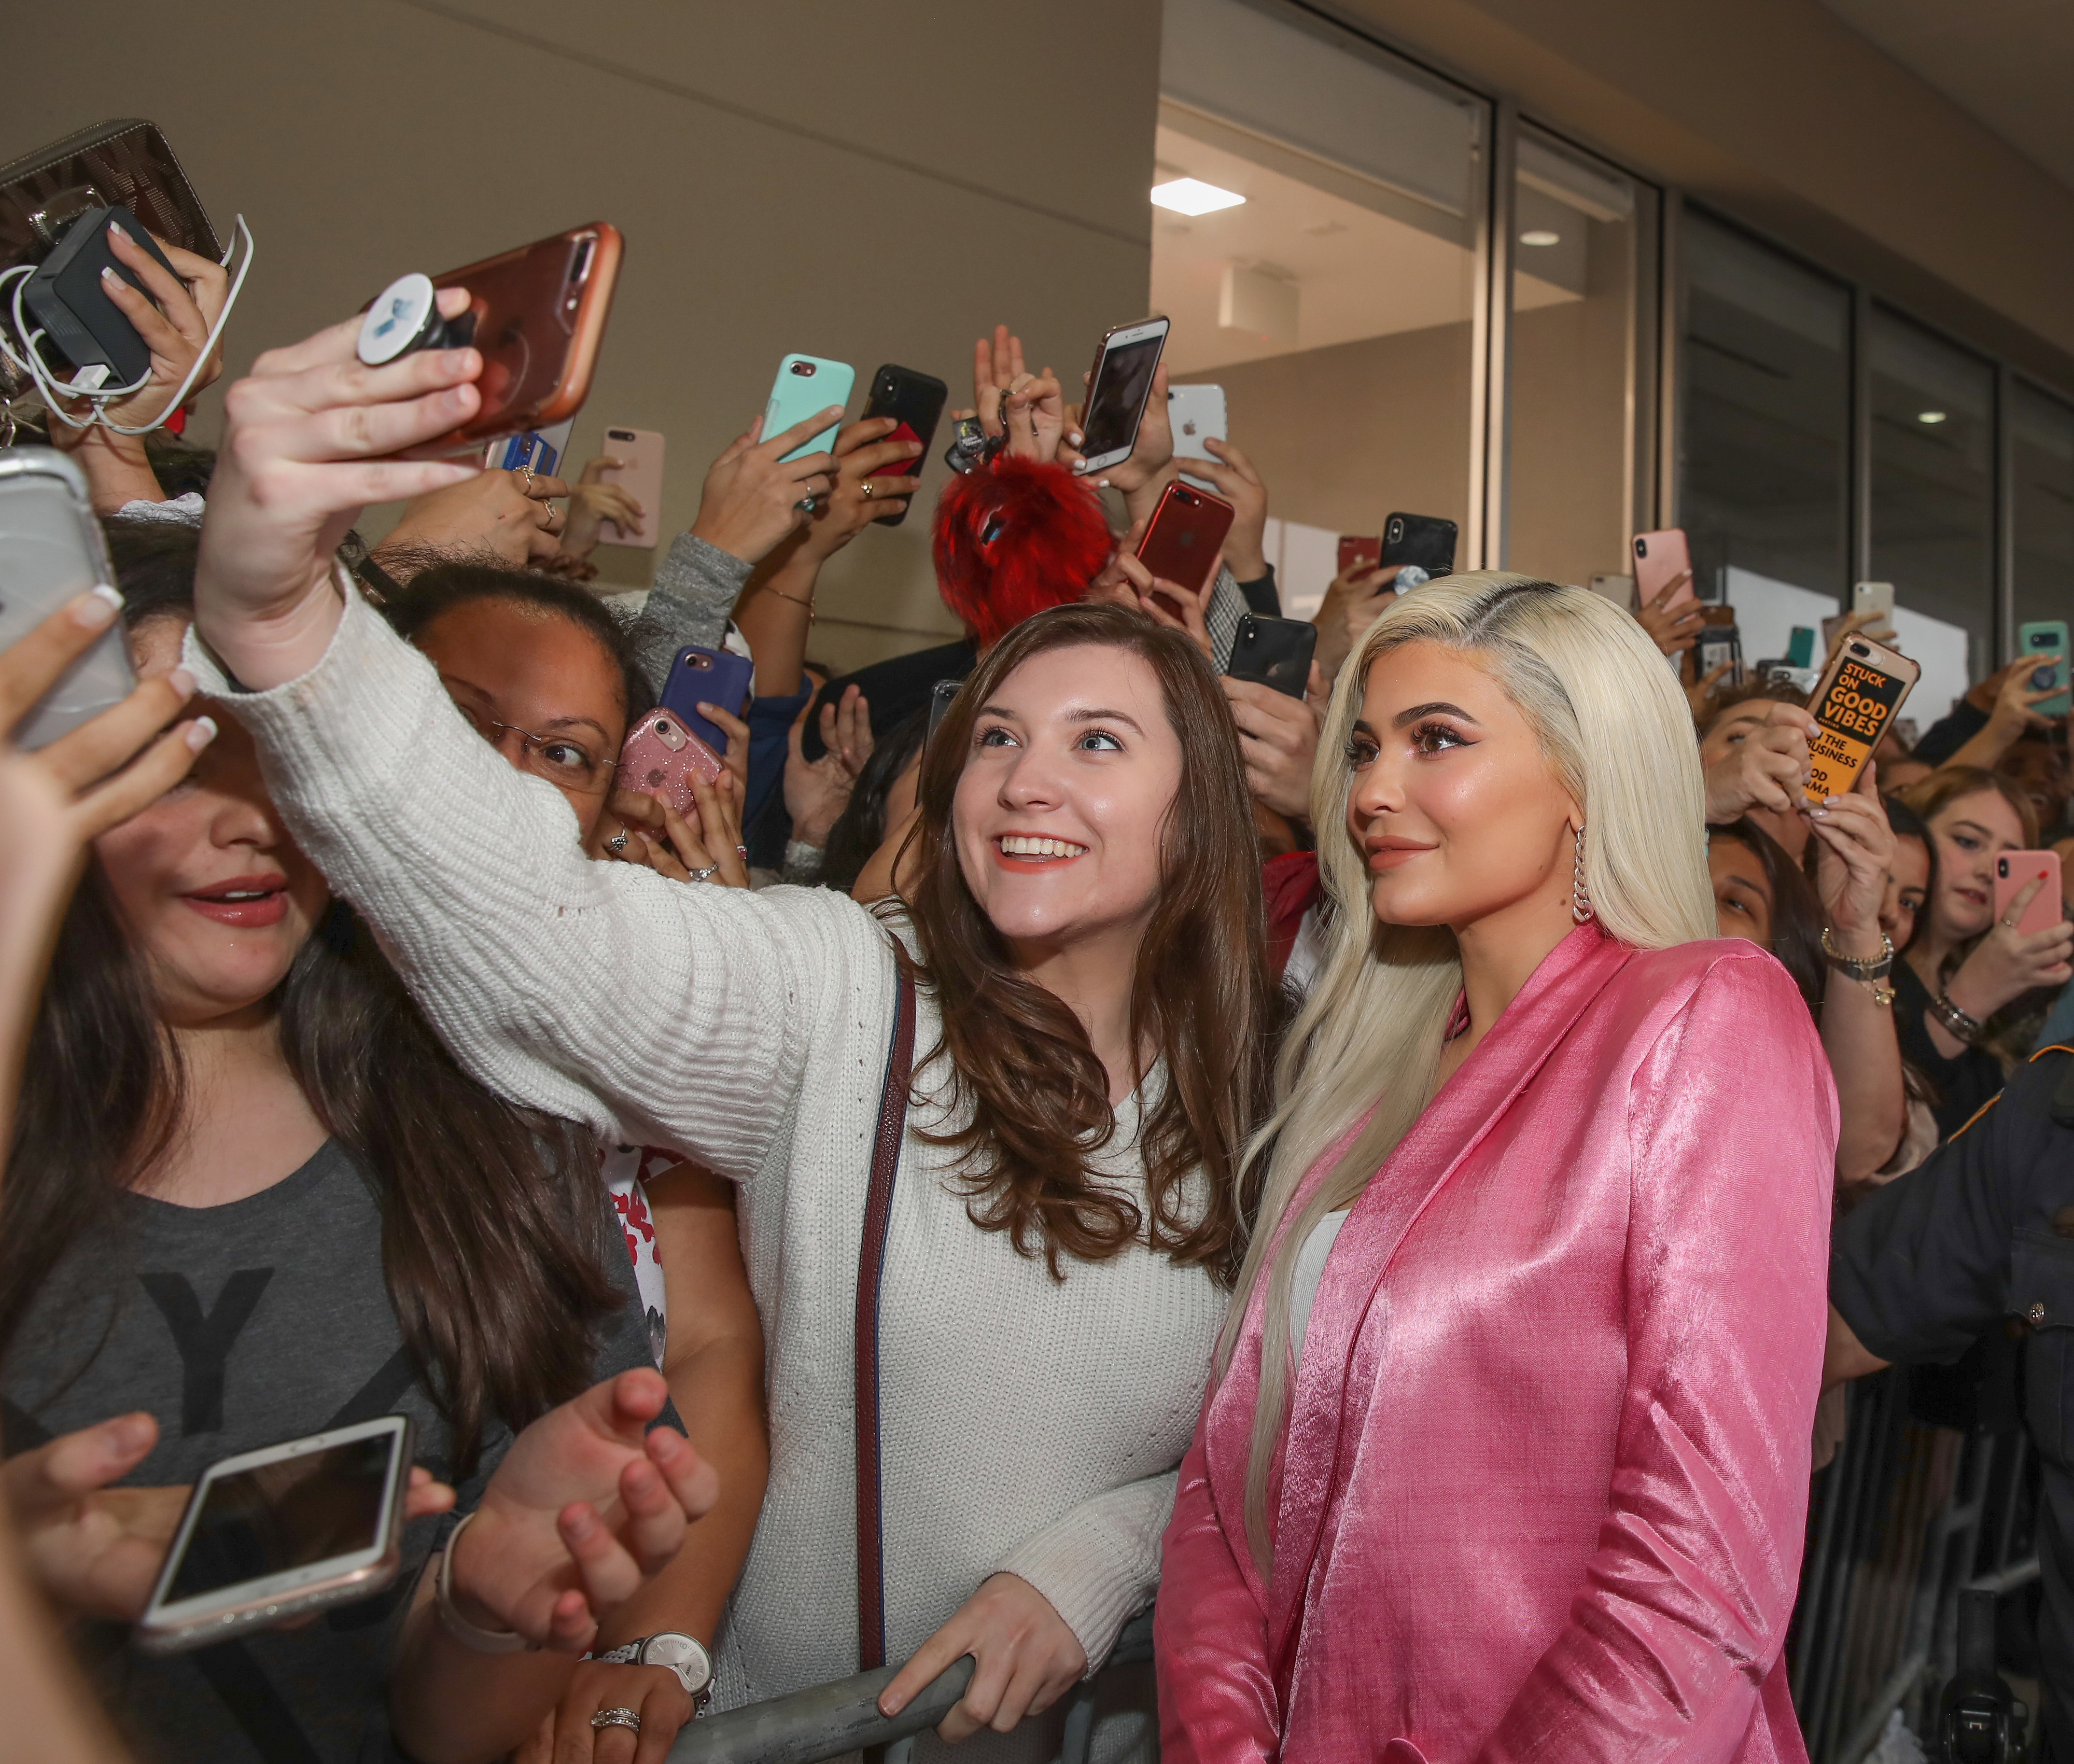 Kylie taking photos with fans